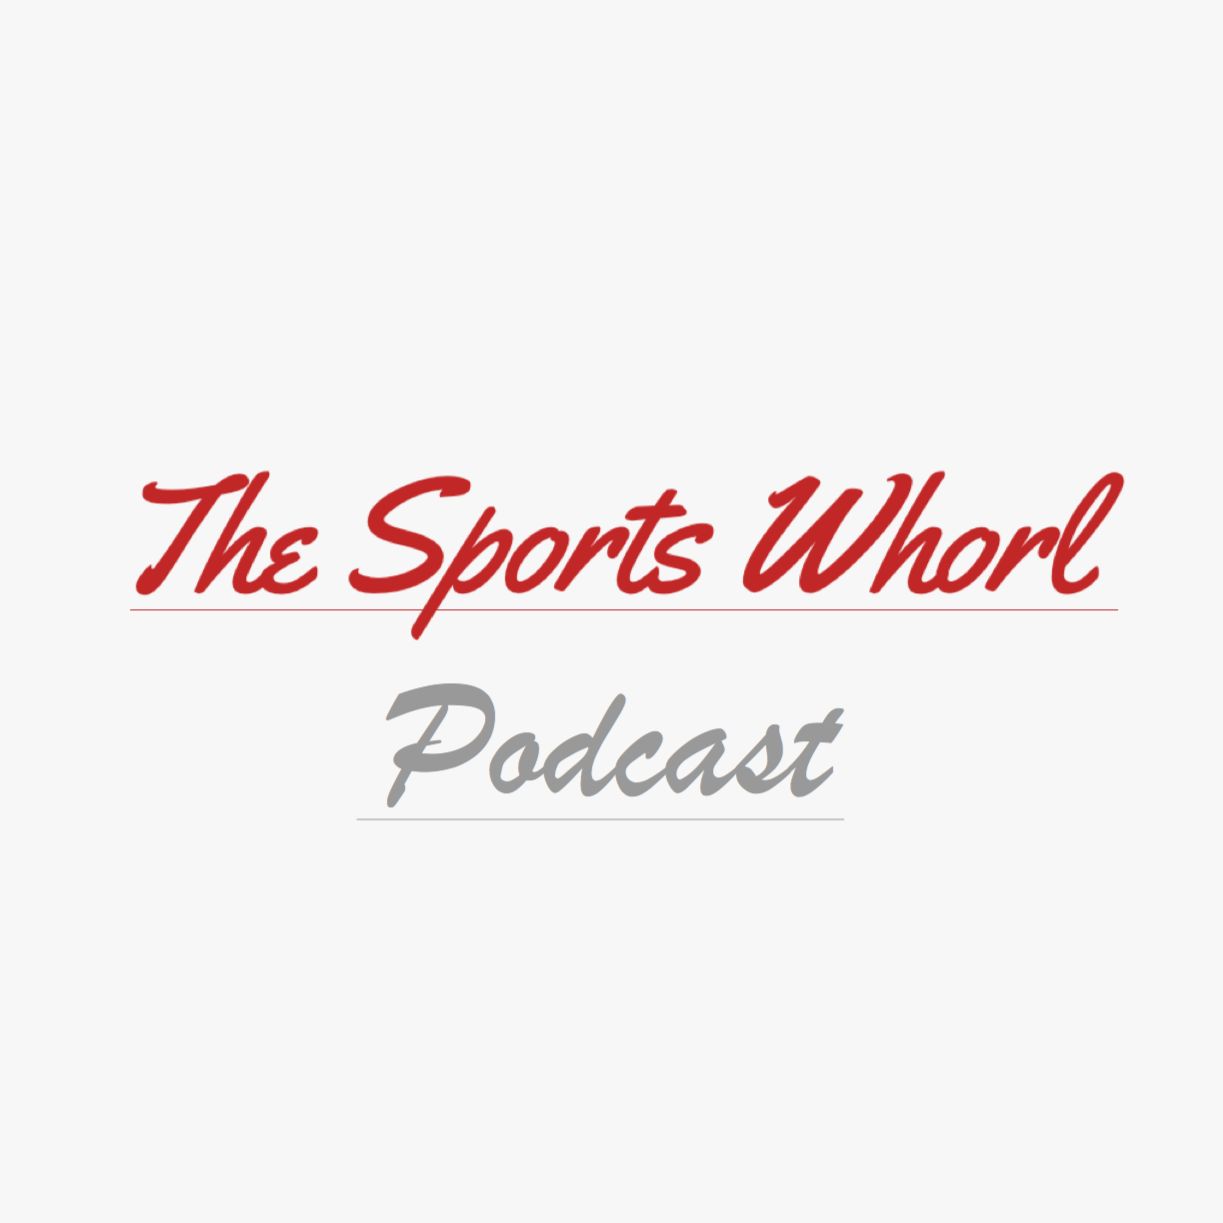 The Sports Whorl Podcast